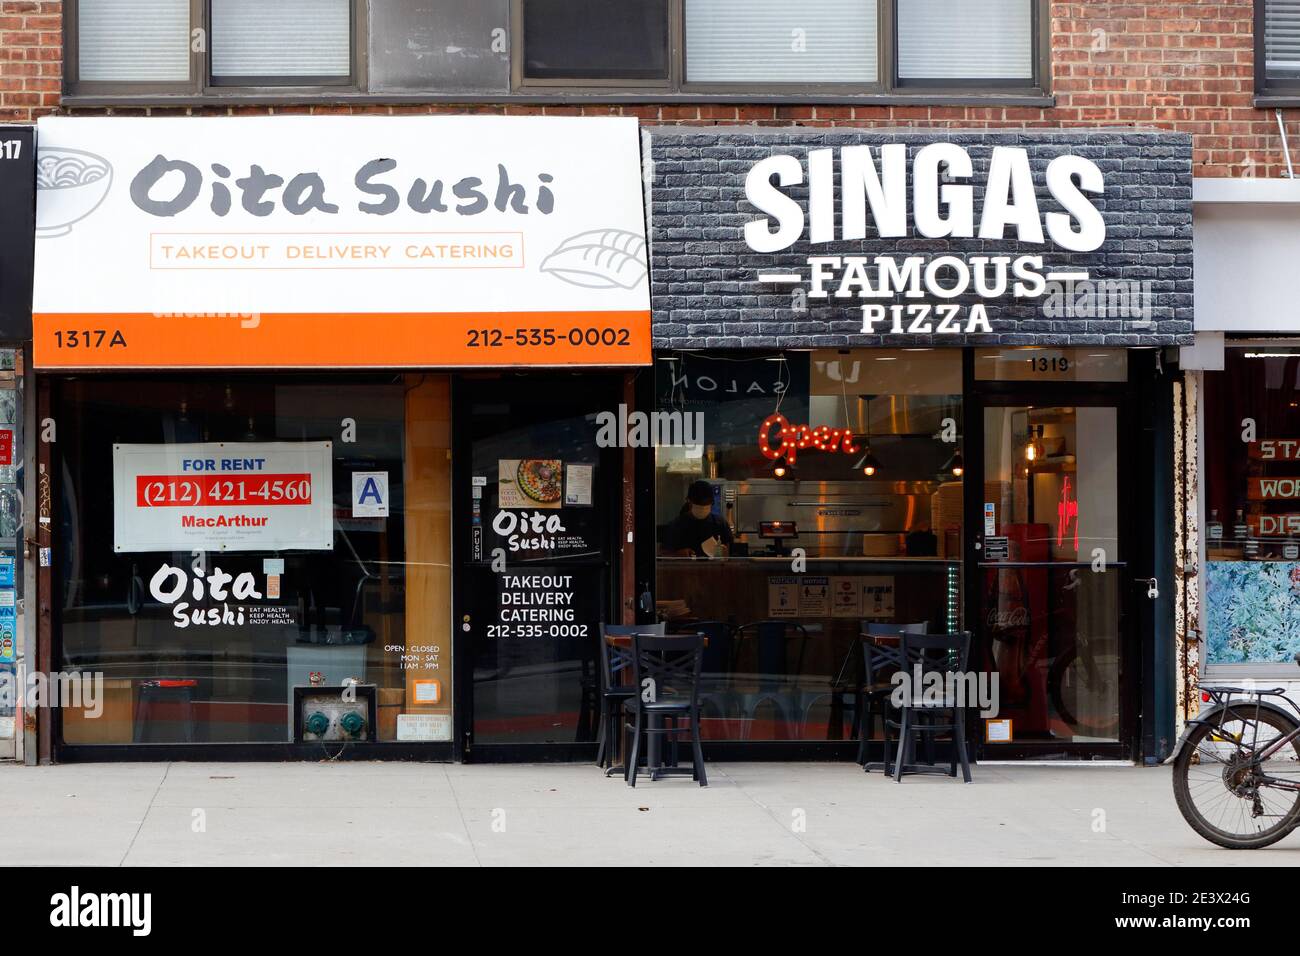 Singas Famous Pizza, 1319 Second Ave, New York, NYC storefront photo of a pizza shop chain in Manhattan's Upper East Side. Stock Photo